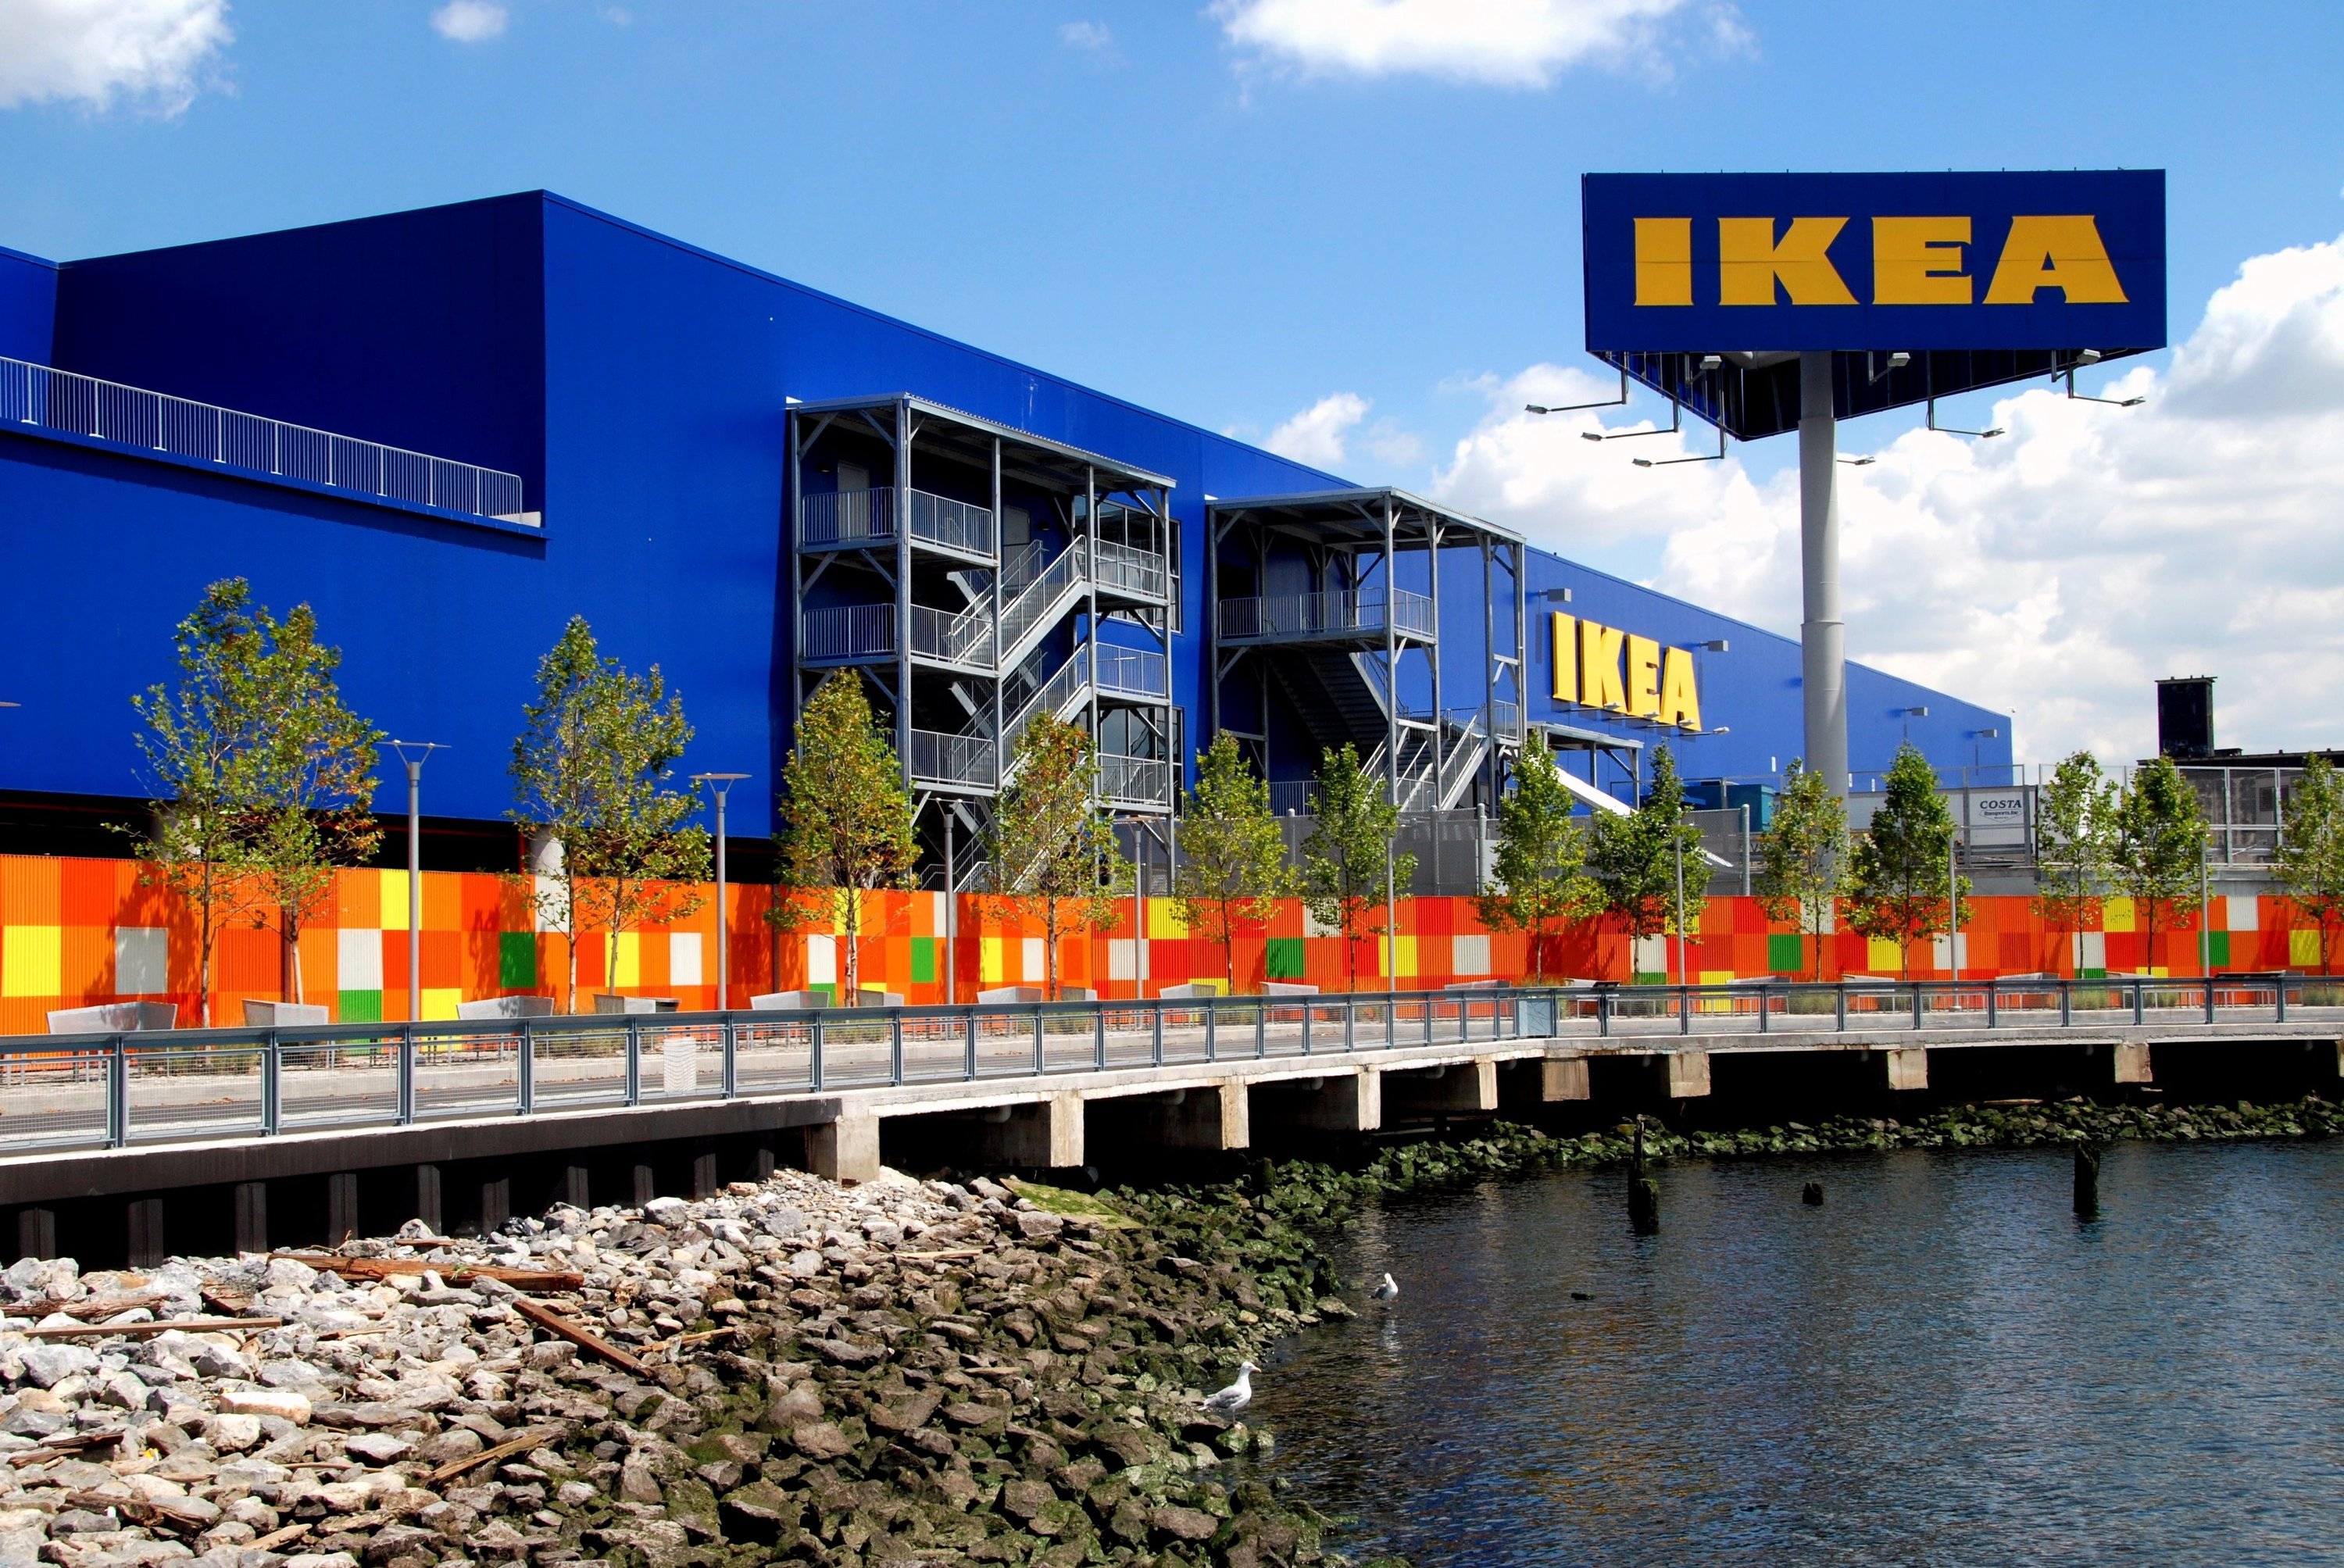 over 鍔 Tilbagekaldelse You can have a sleepover at the IKEA in Red Hook